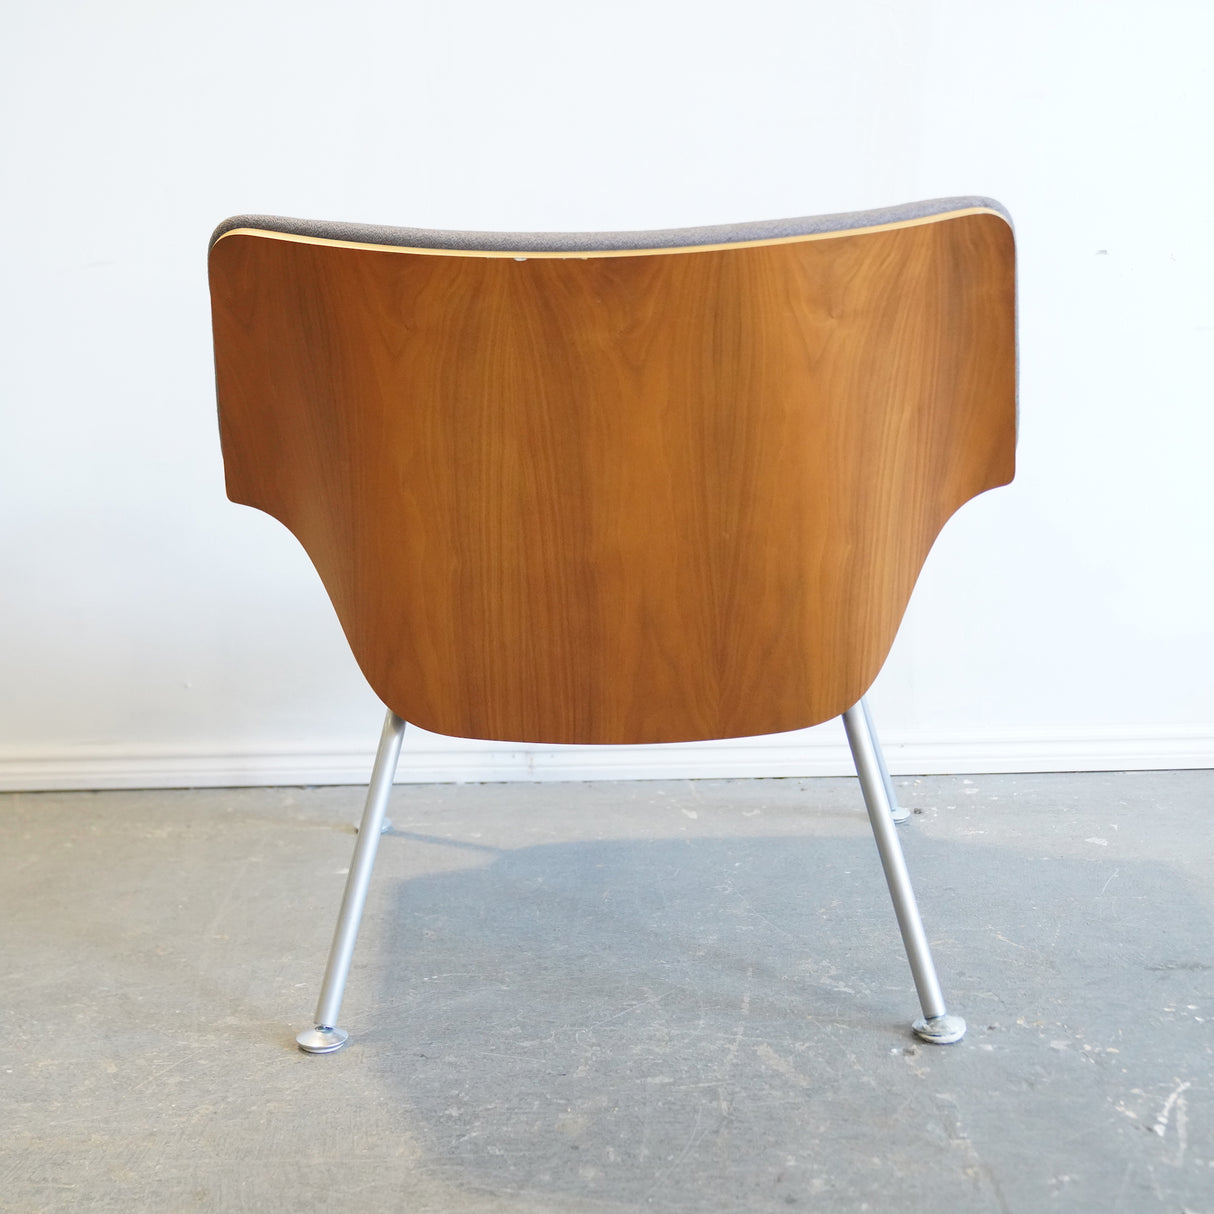 Authentic Herman Miller swoop plywood lounge chair